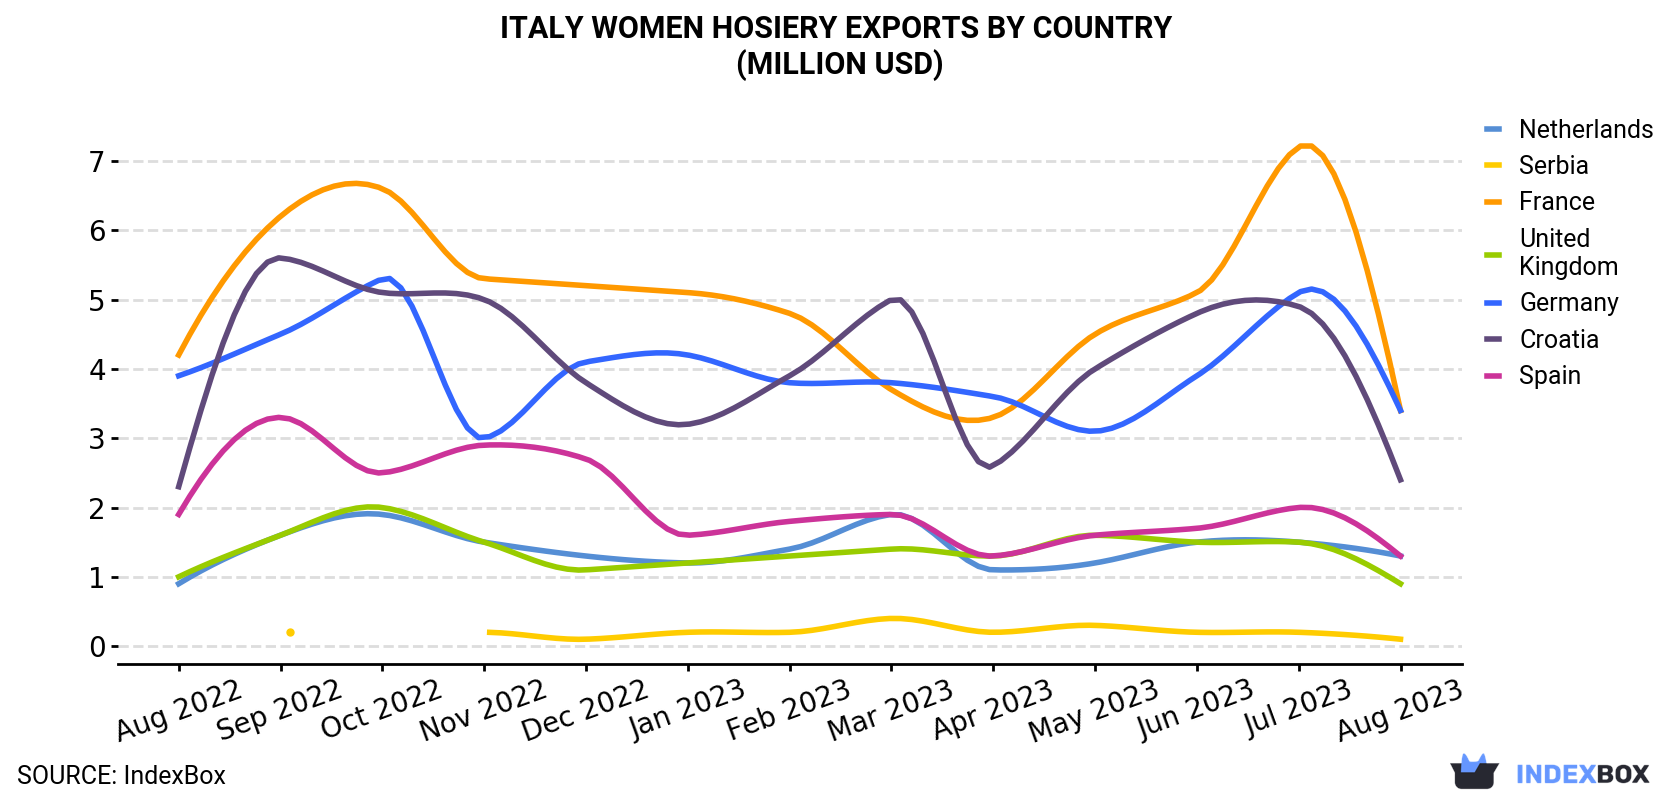 Italy Women Hosiery Exports By Country (Million USD)